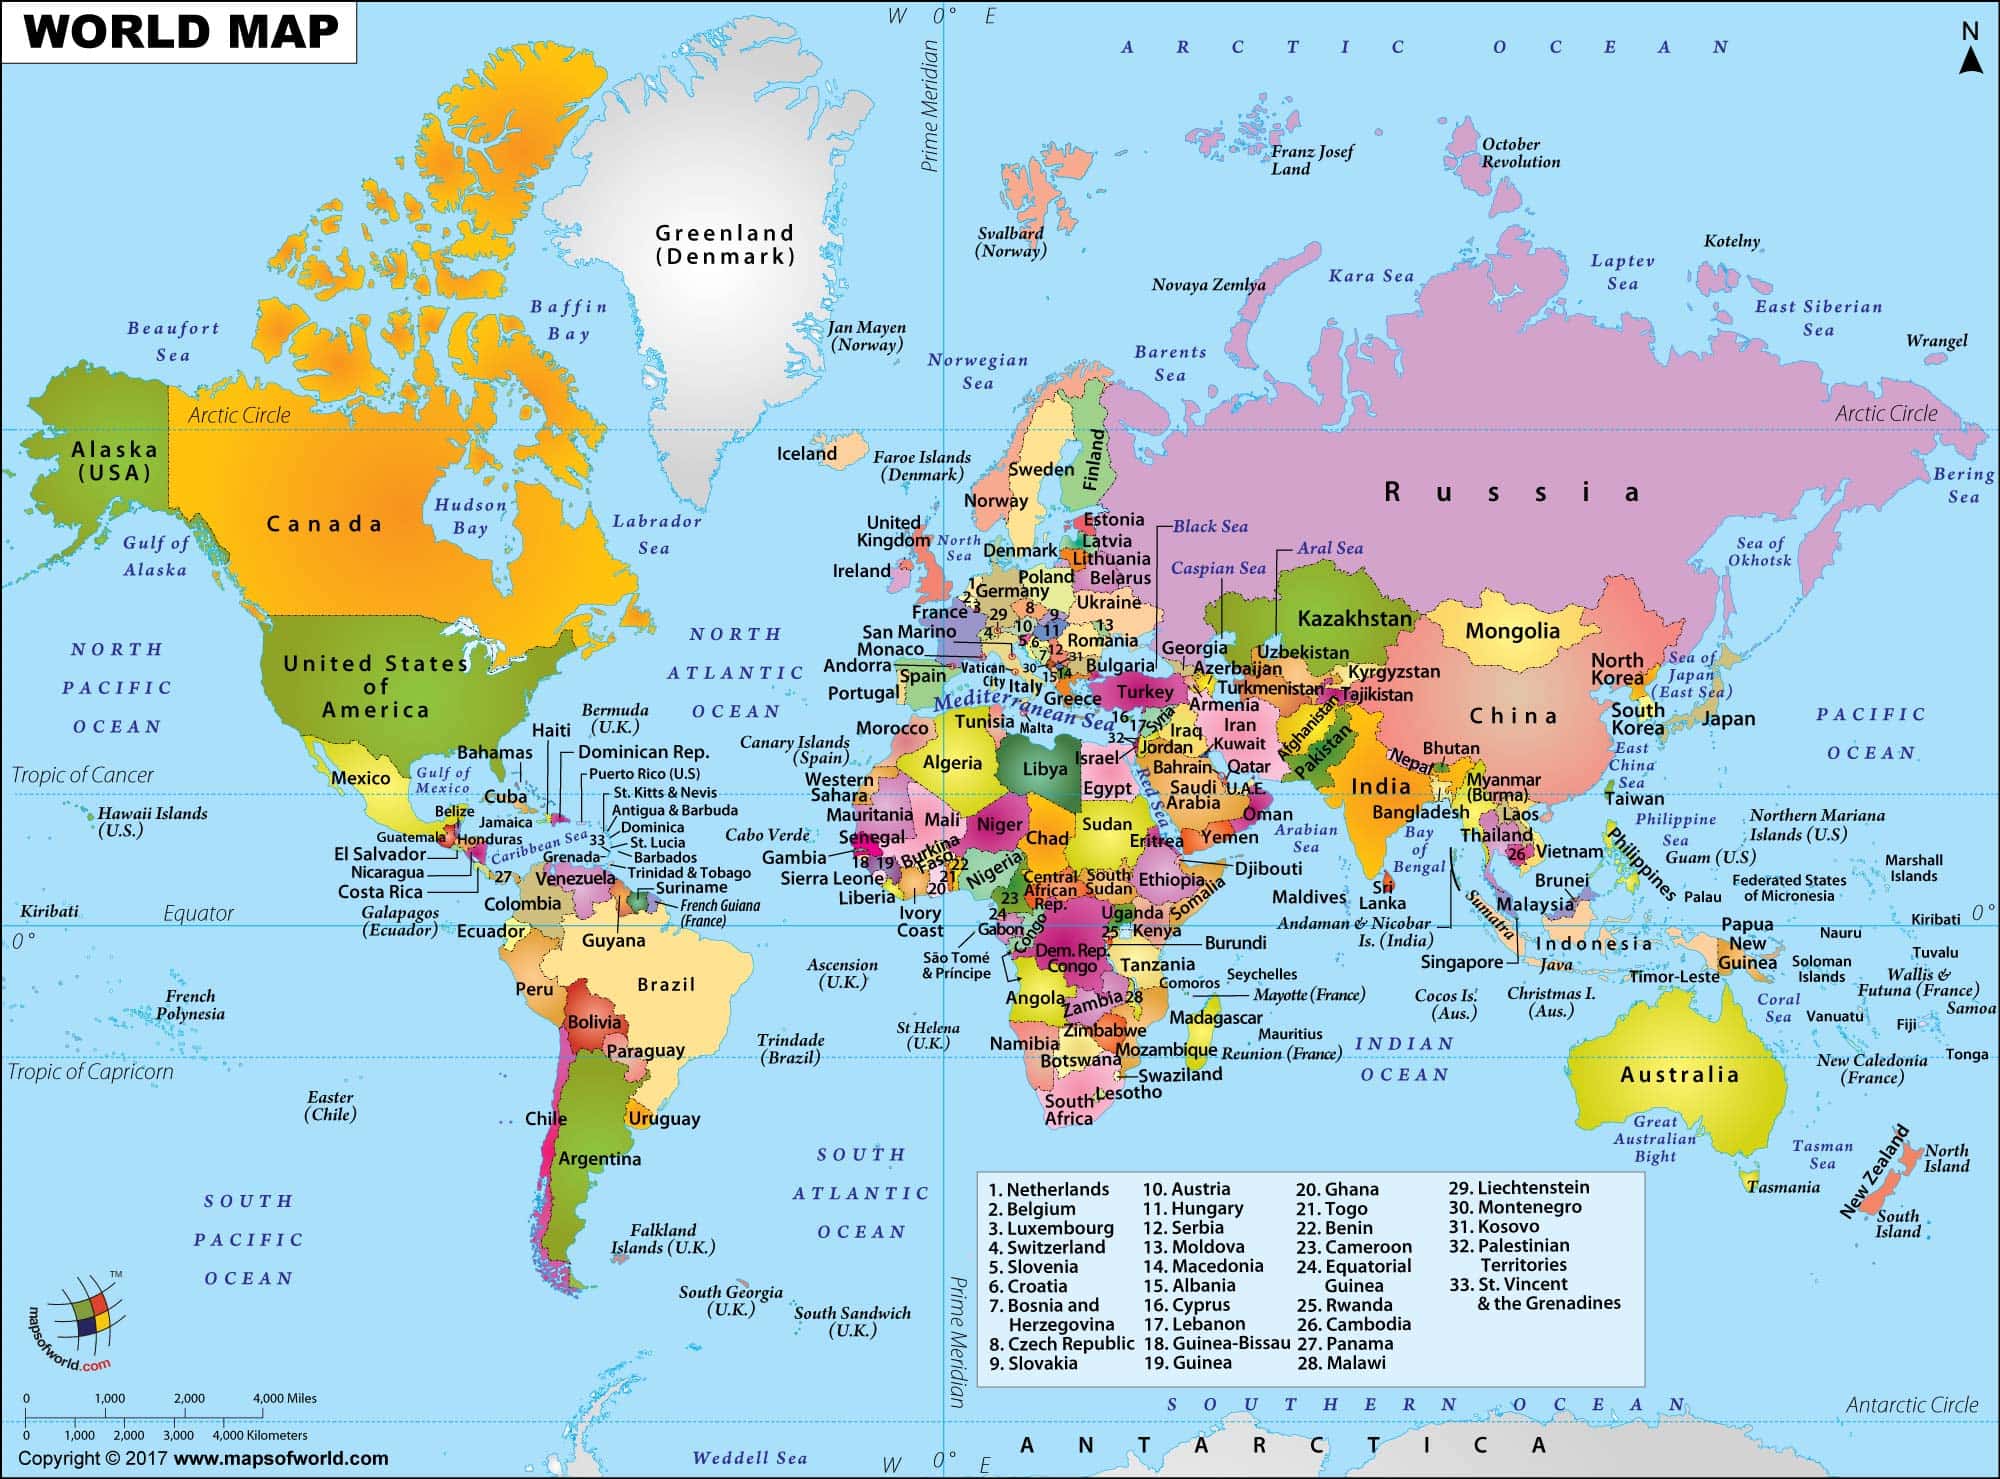 Why a world map with countries and capitals is useful and where is it used